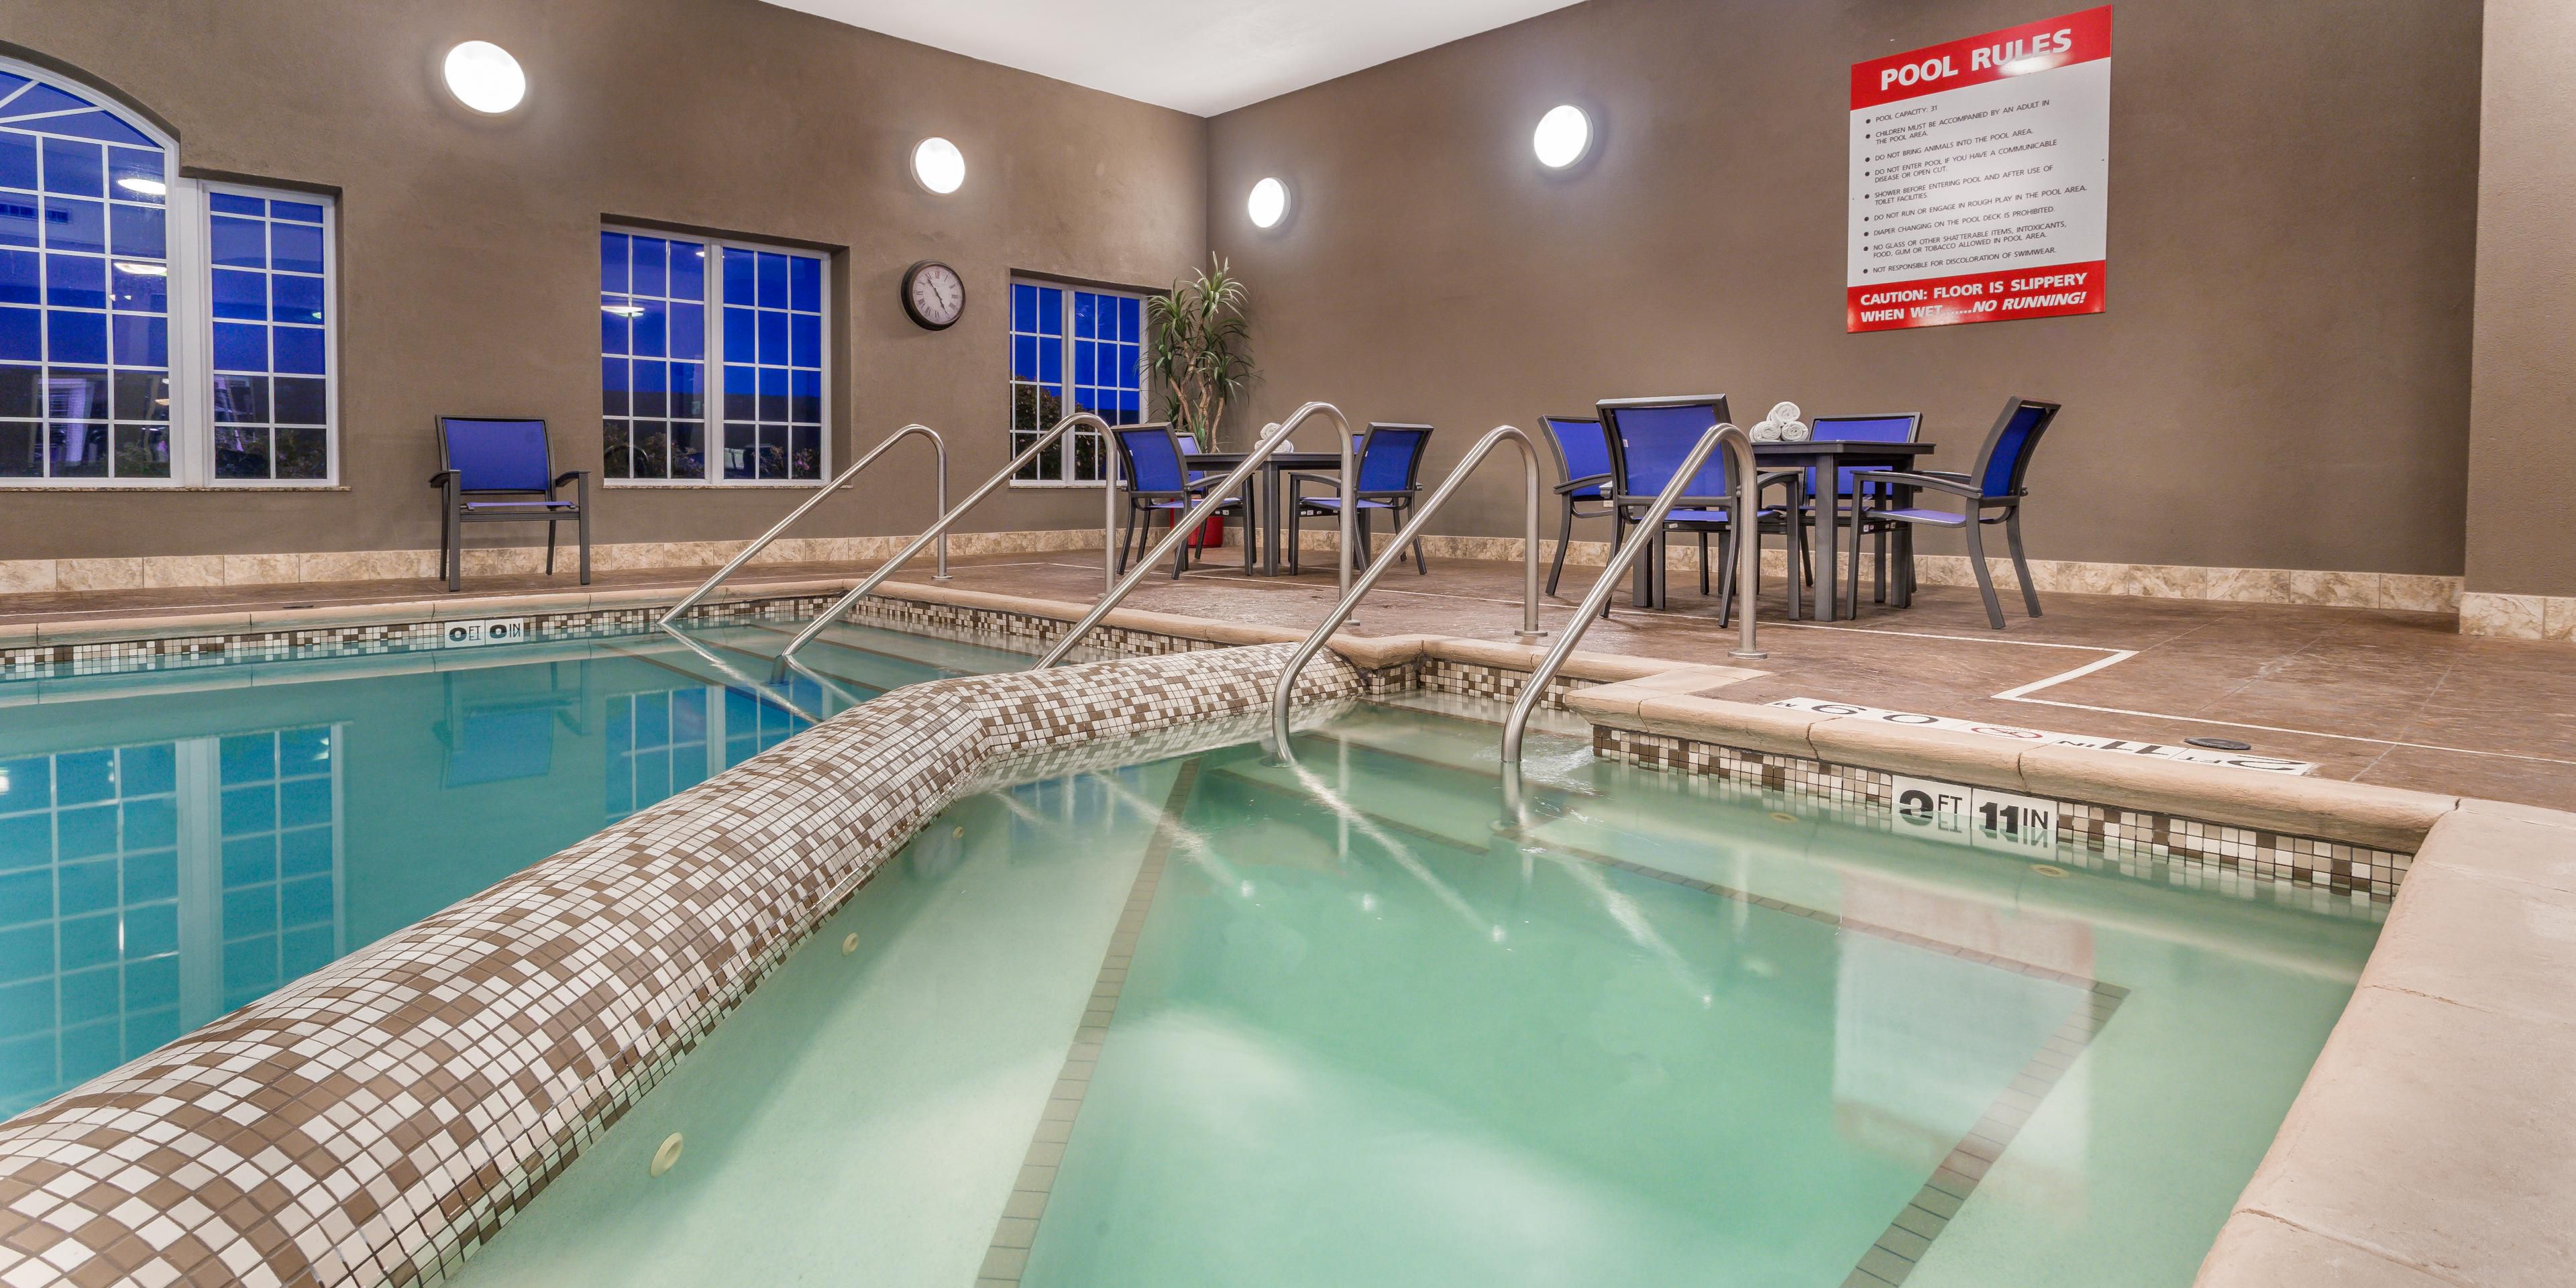 Unwind and enjoy our heated indoor pool and whirlpool while staying with us at the Holiday Inn Express & Suites Chippewa Falls.